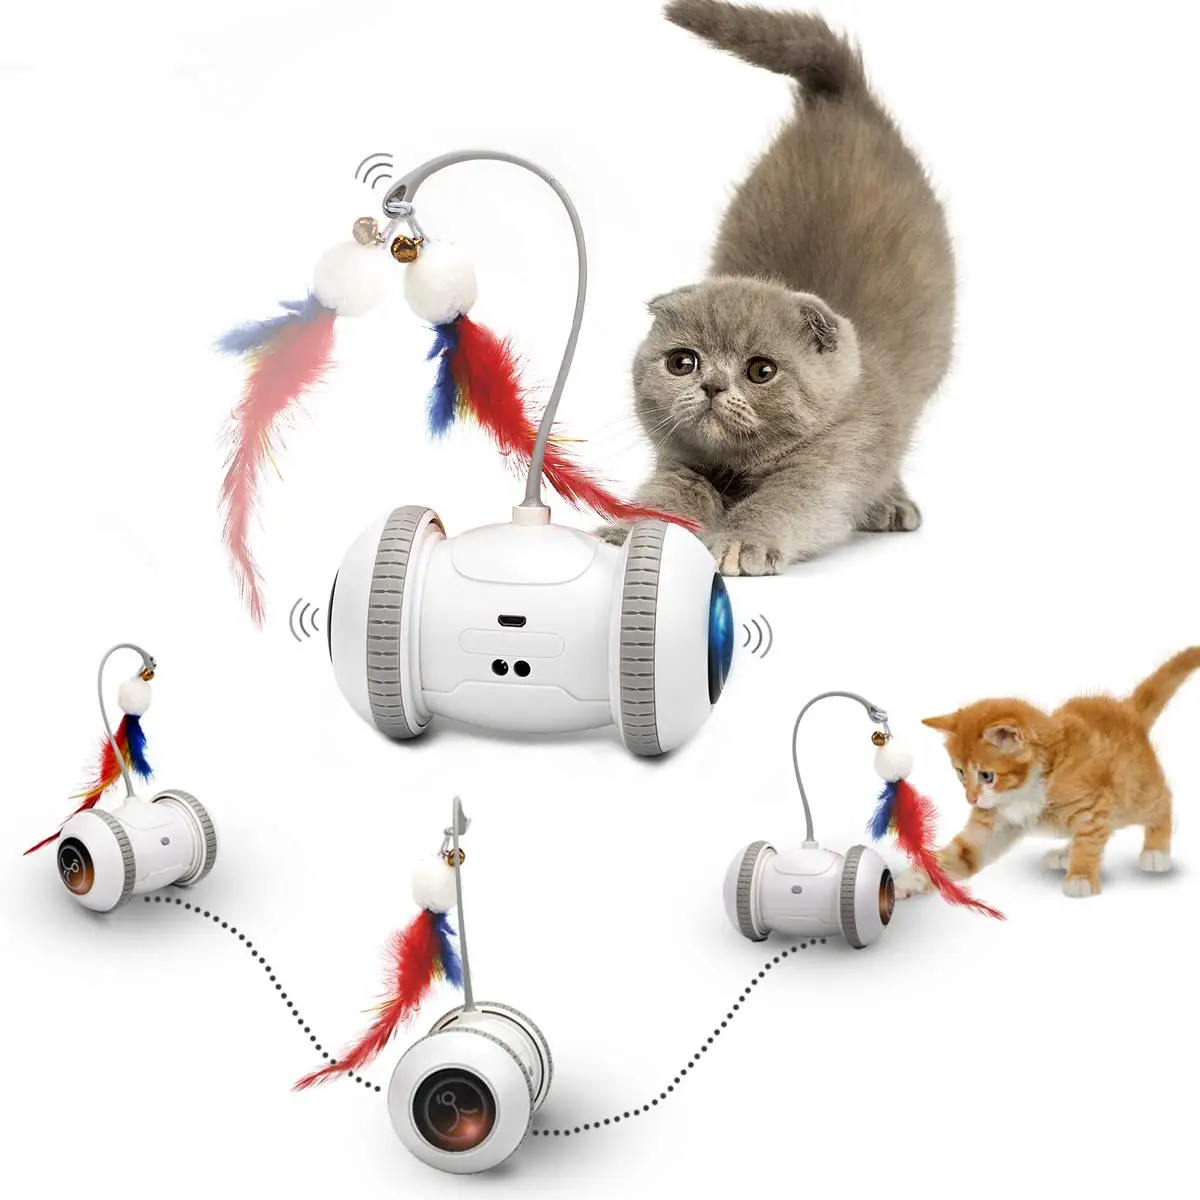 Automatic Sensor Cat Toys Interactive Smart Robotic Electronic Feather Teaser Self-Playing USB Rechargeable Kitten Toys for Pets